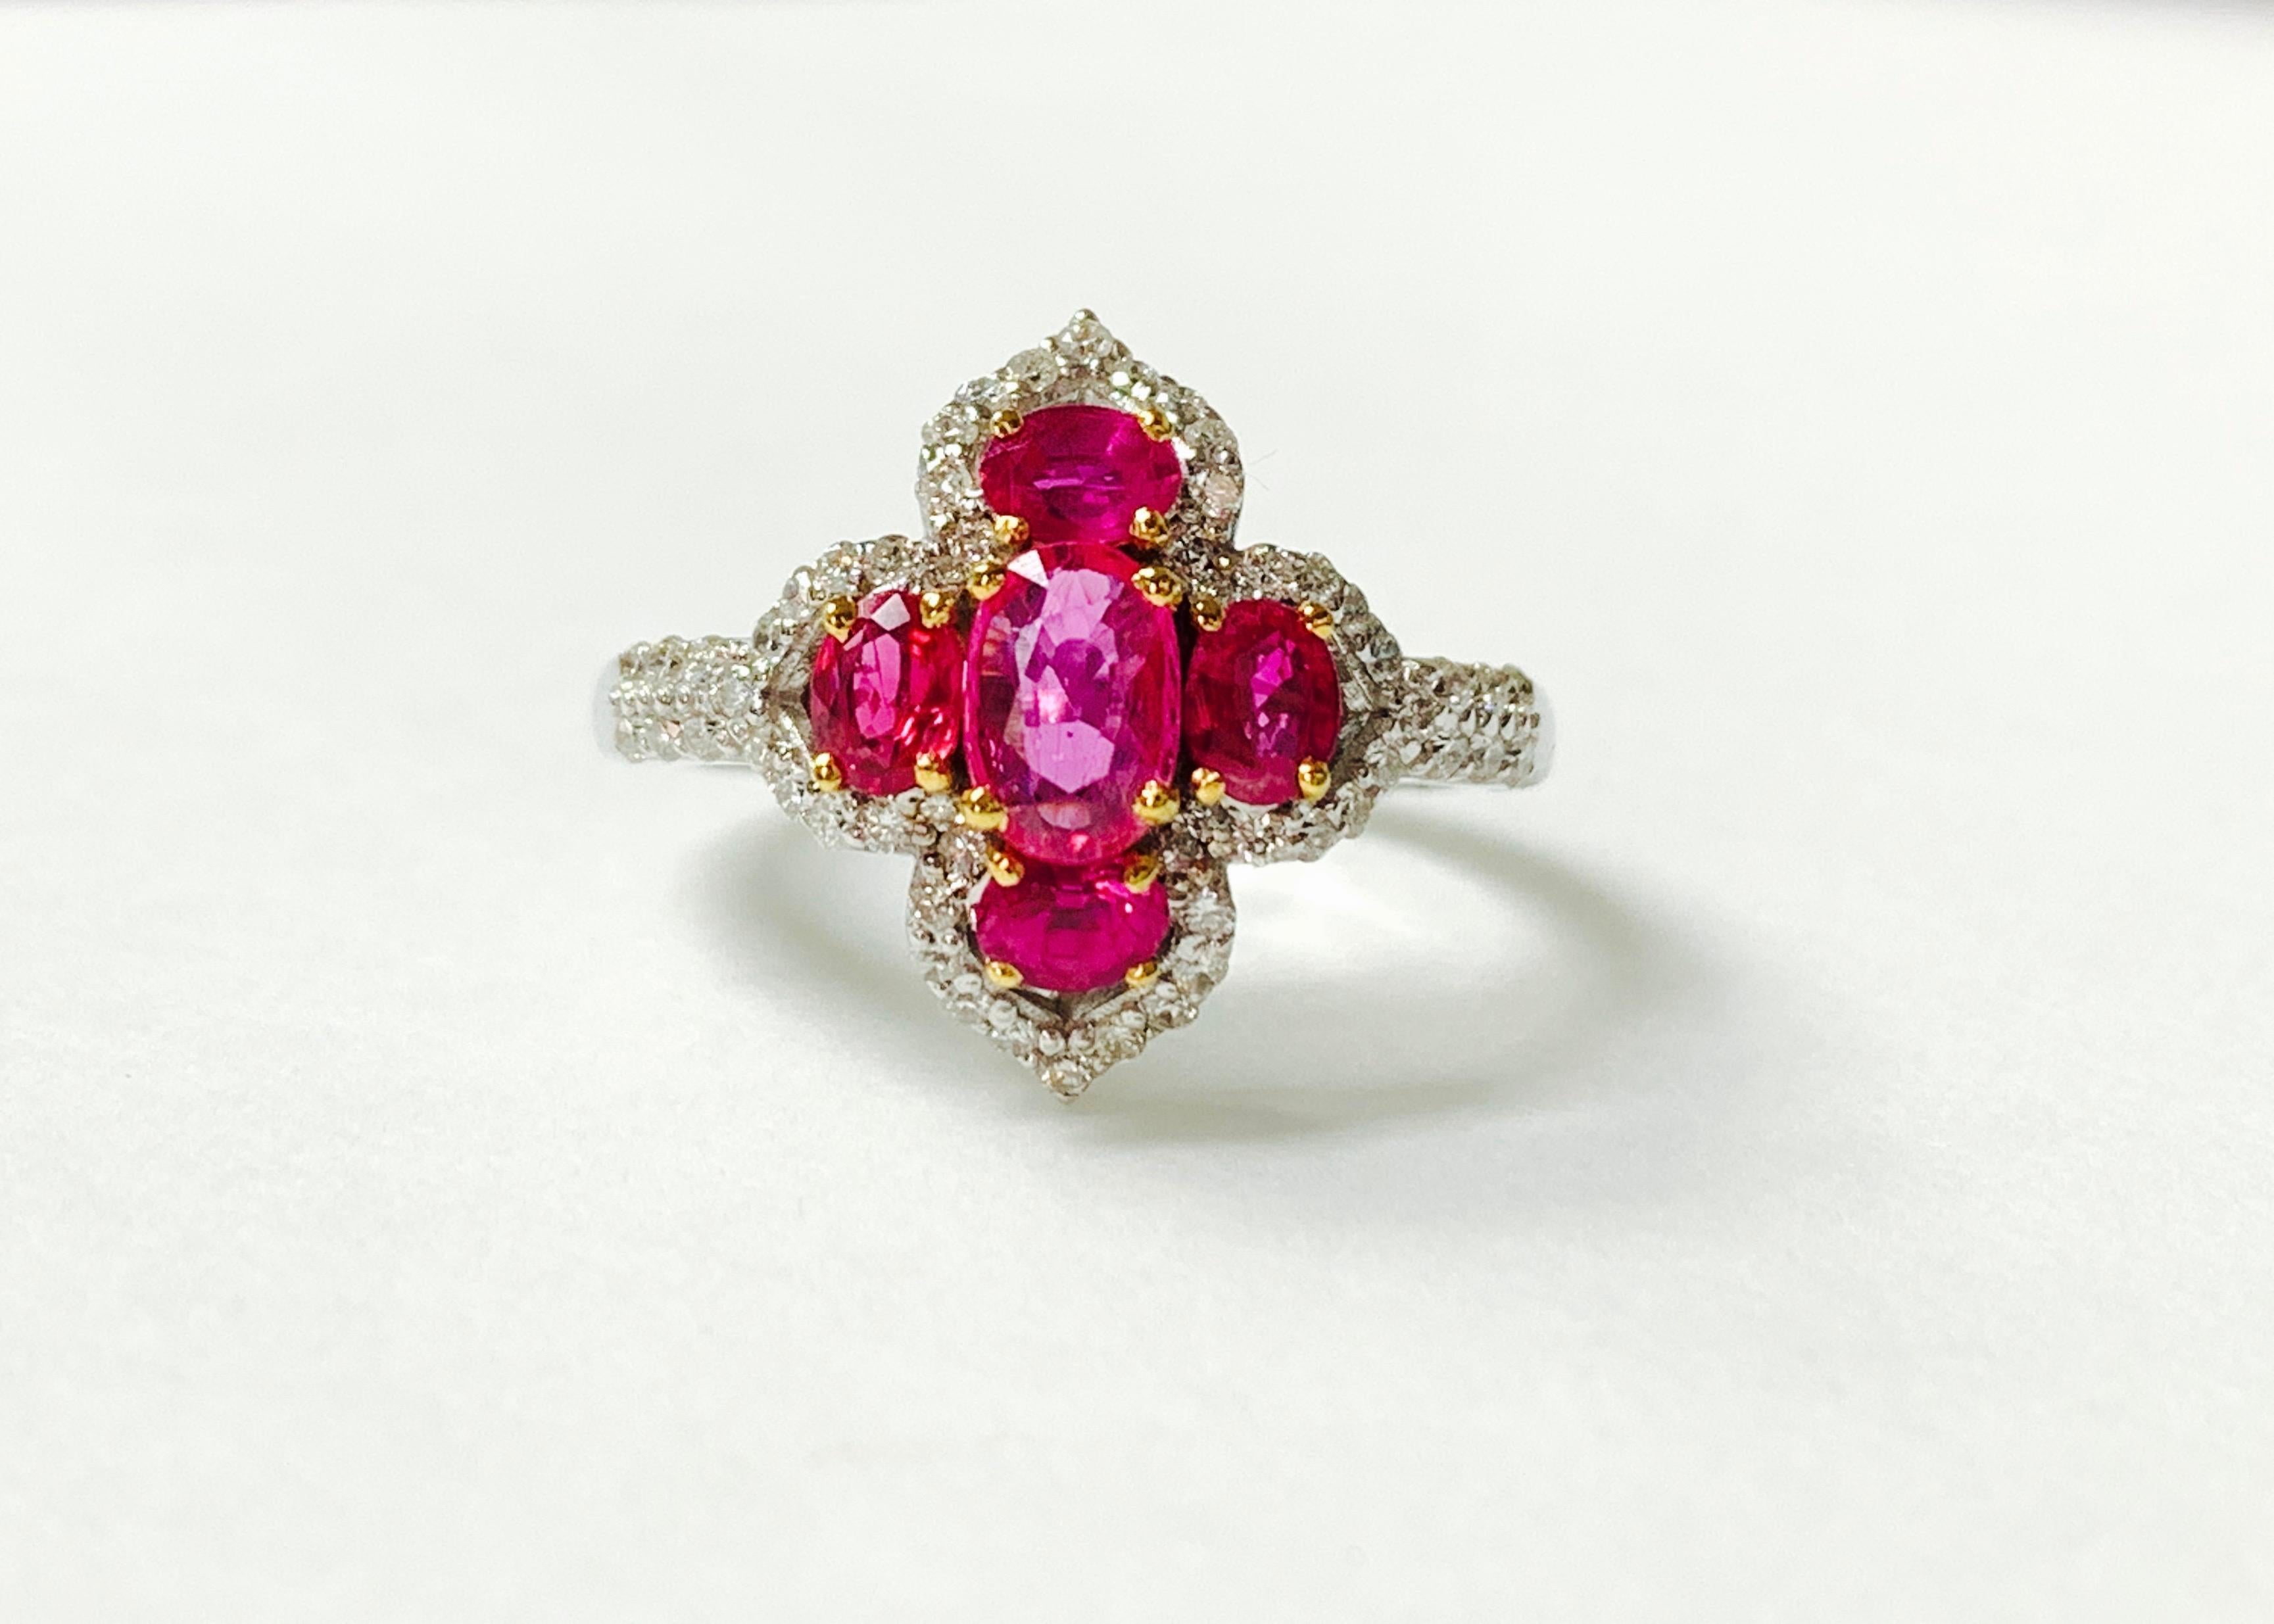 Contemporary Diamond and Ruby Ring in 18 Karat White Gold